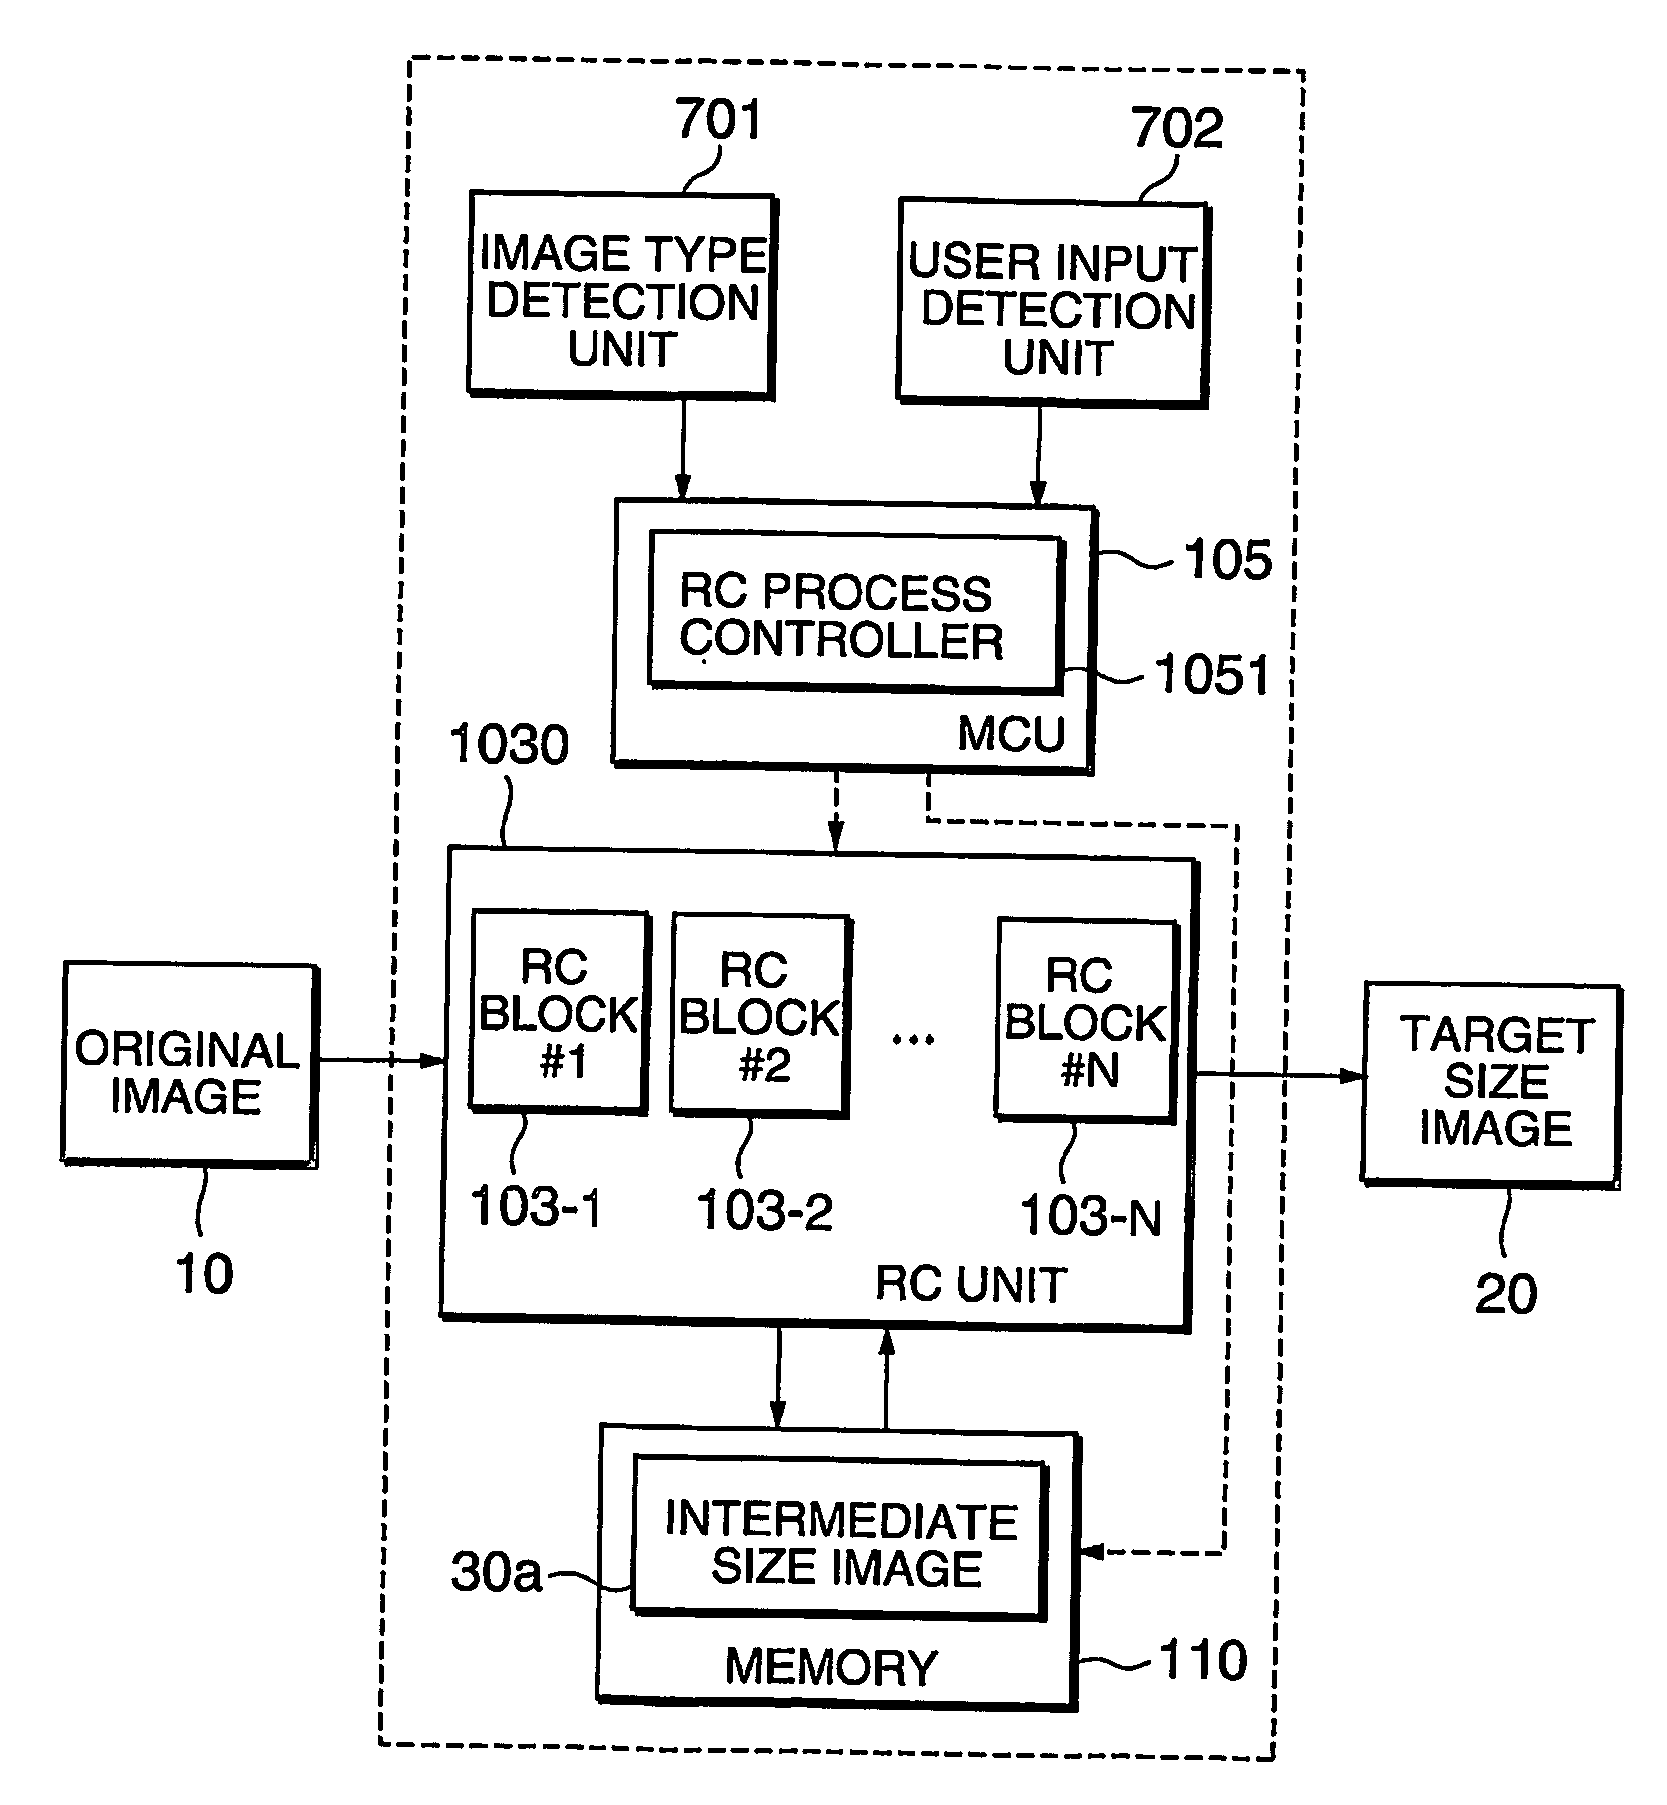 Apparatus and method for producing thumbnail images and for improving image quality of re-sized images